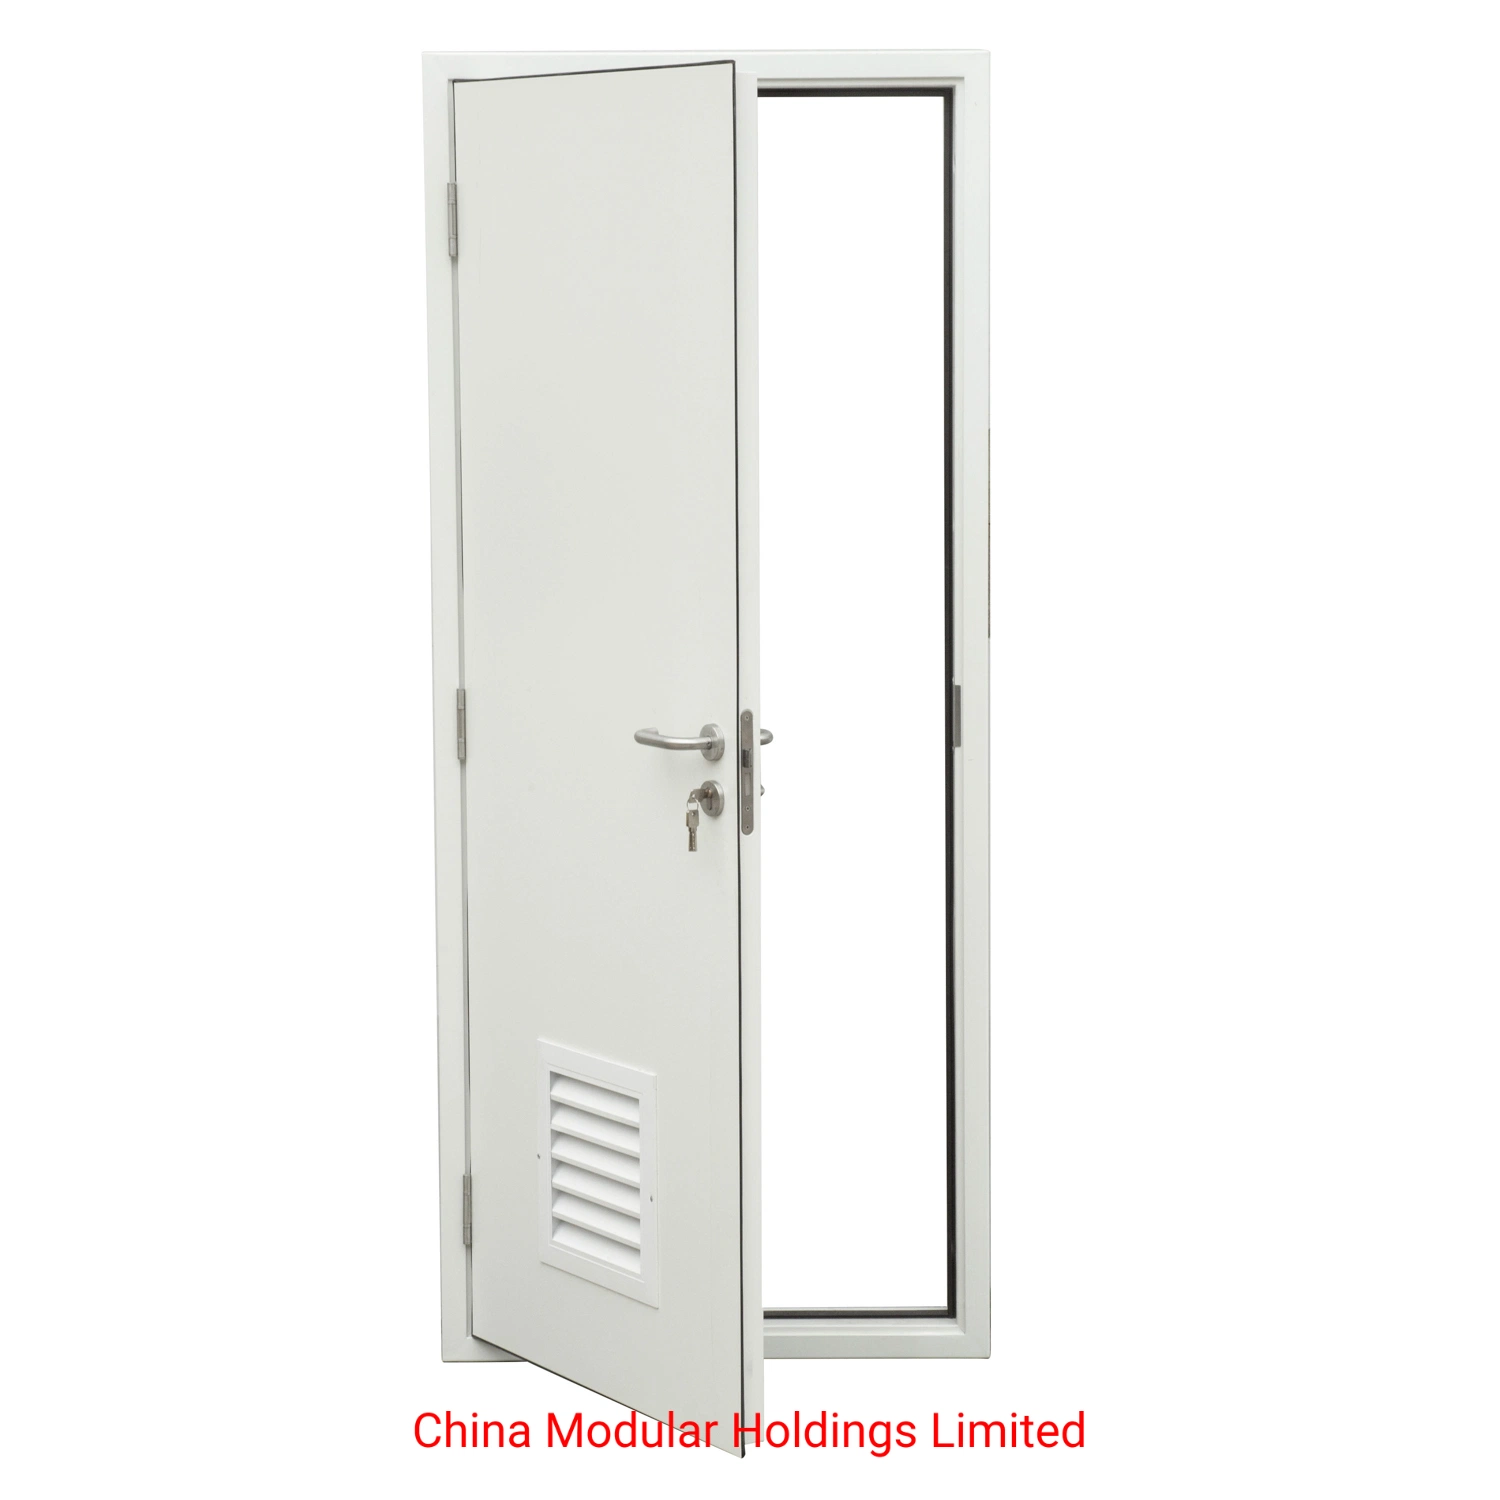 Steel Door with Air Vent for Temporary Toilets (CHAM-SDAV600)